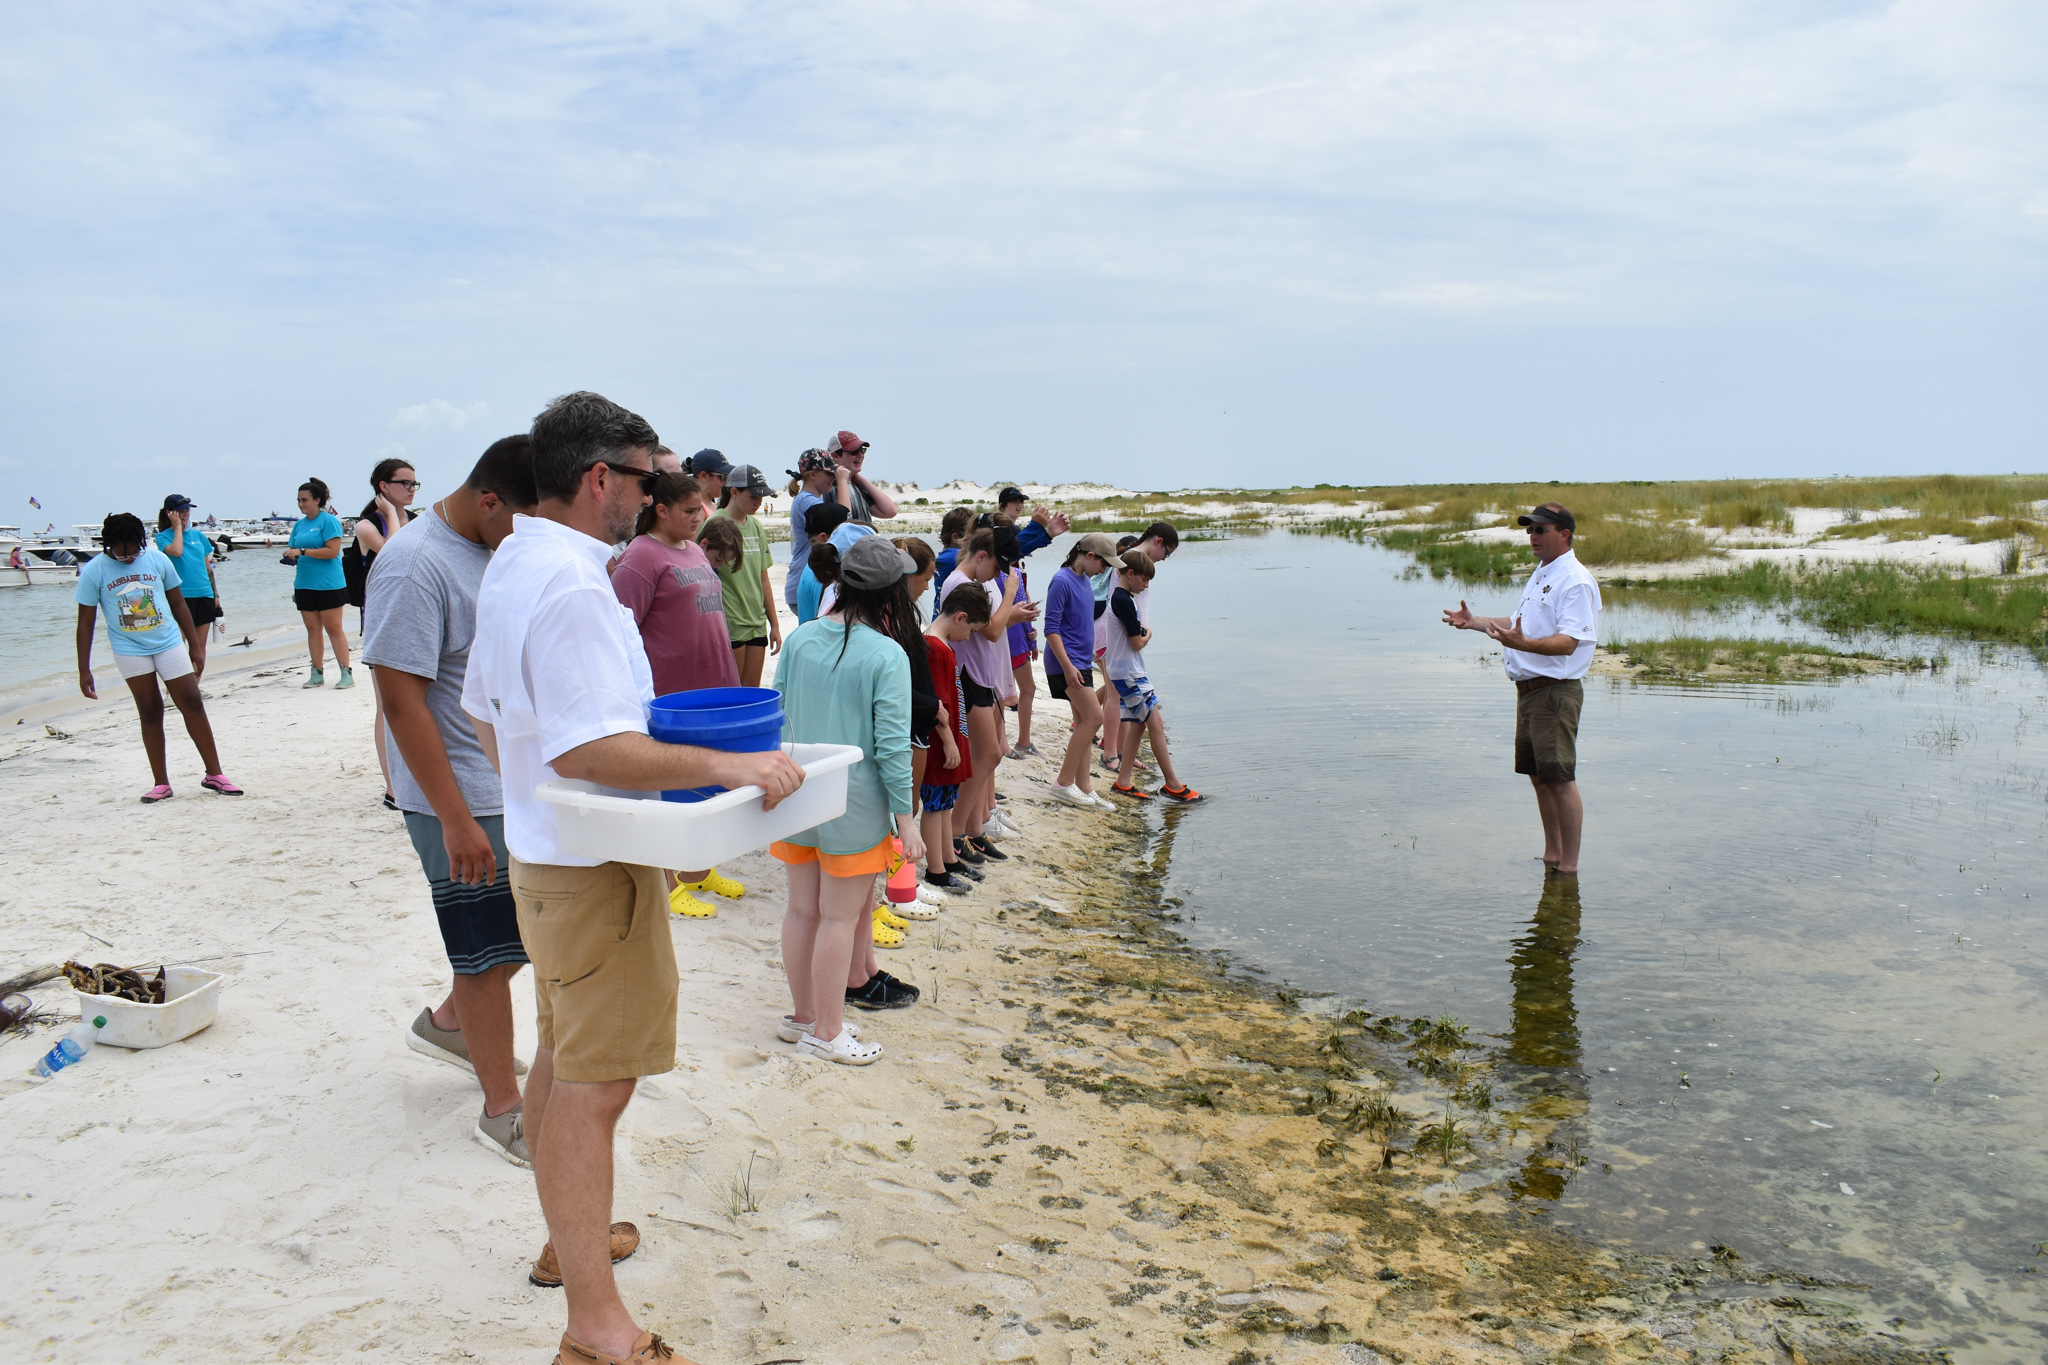 Dr. Gray Turnage discusses invasive aquatic plants and tidal ecosystems